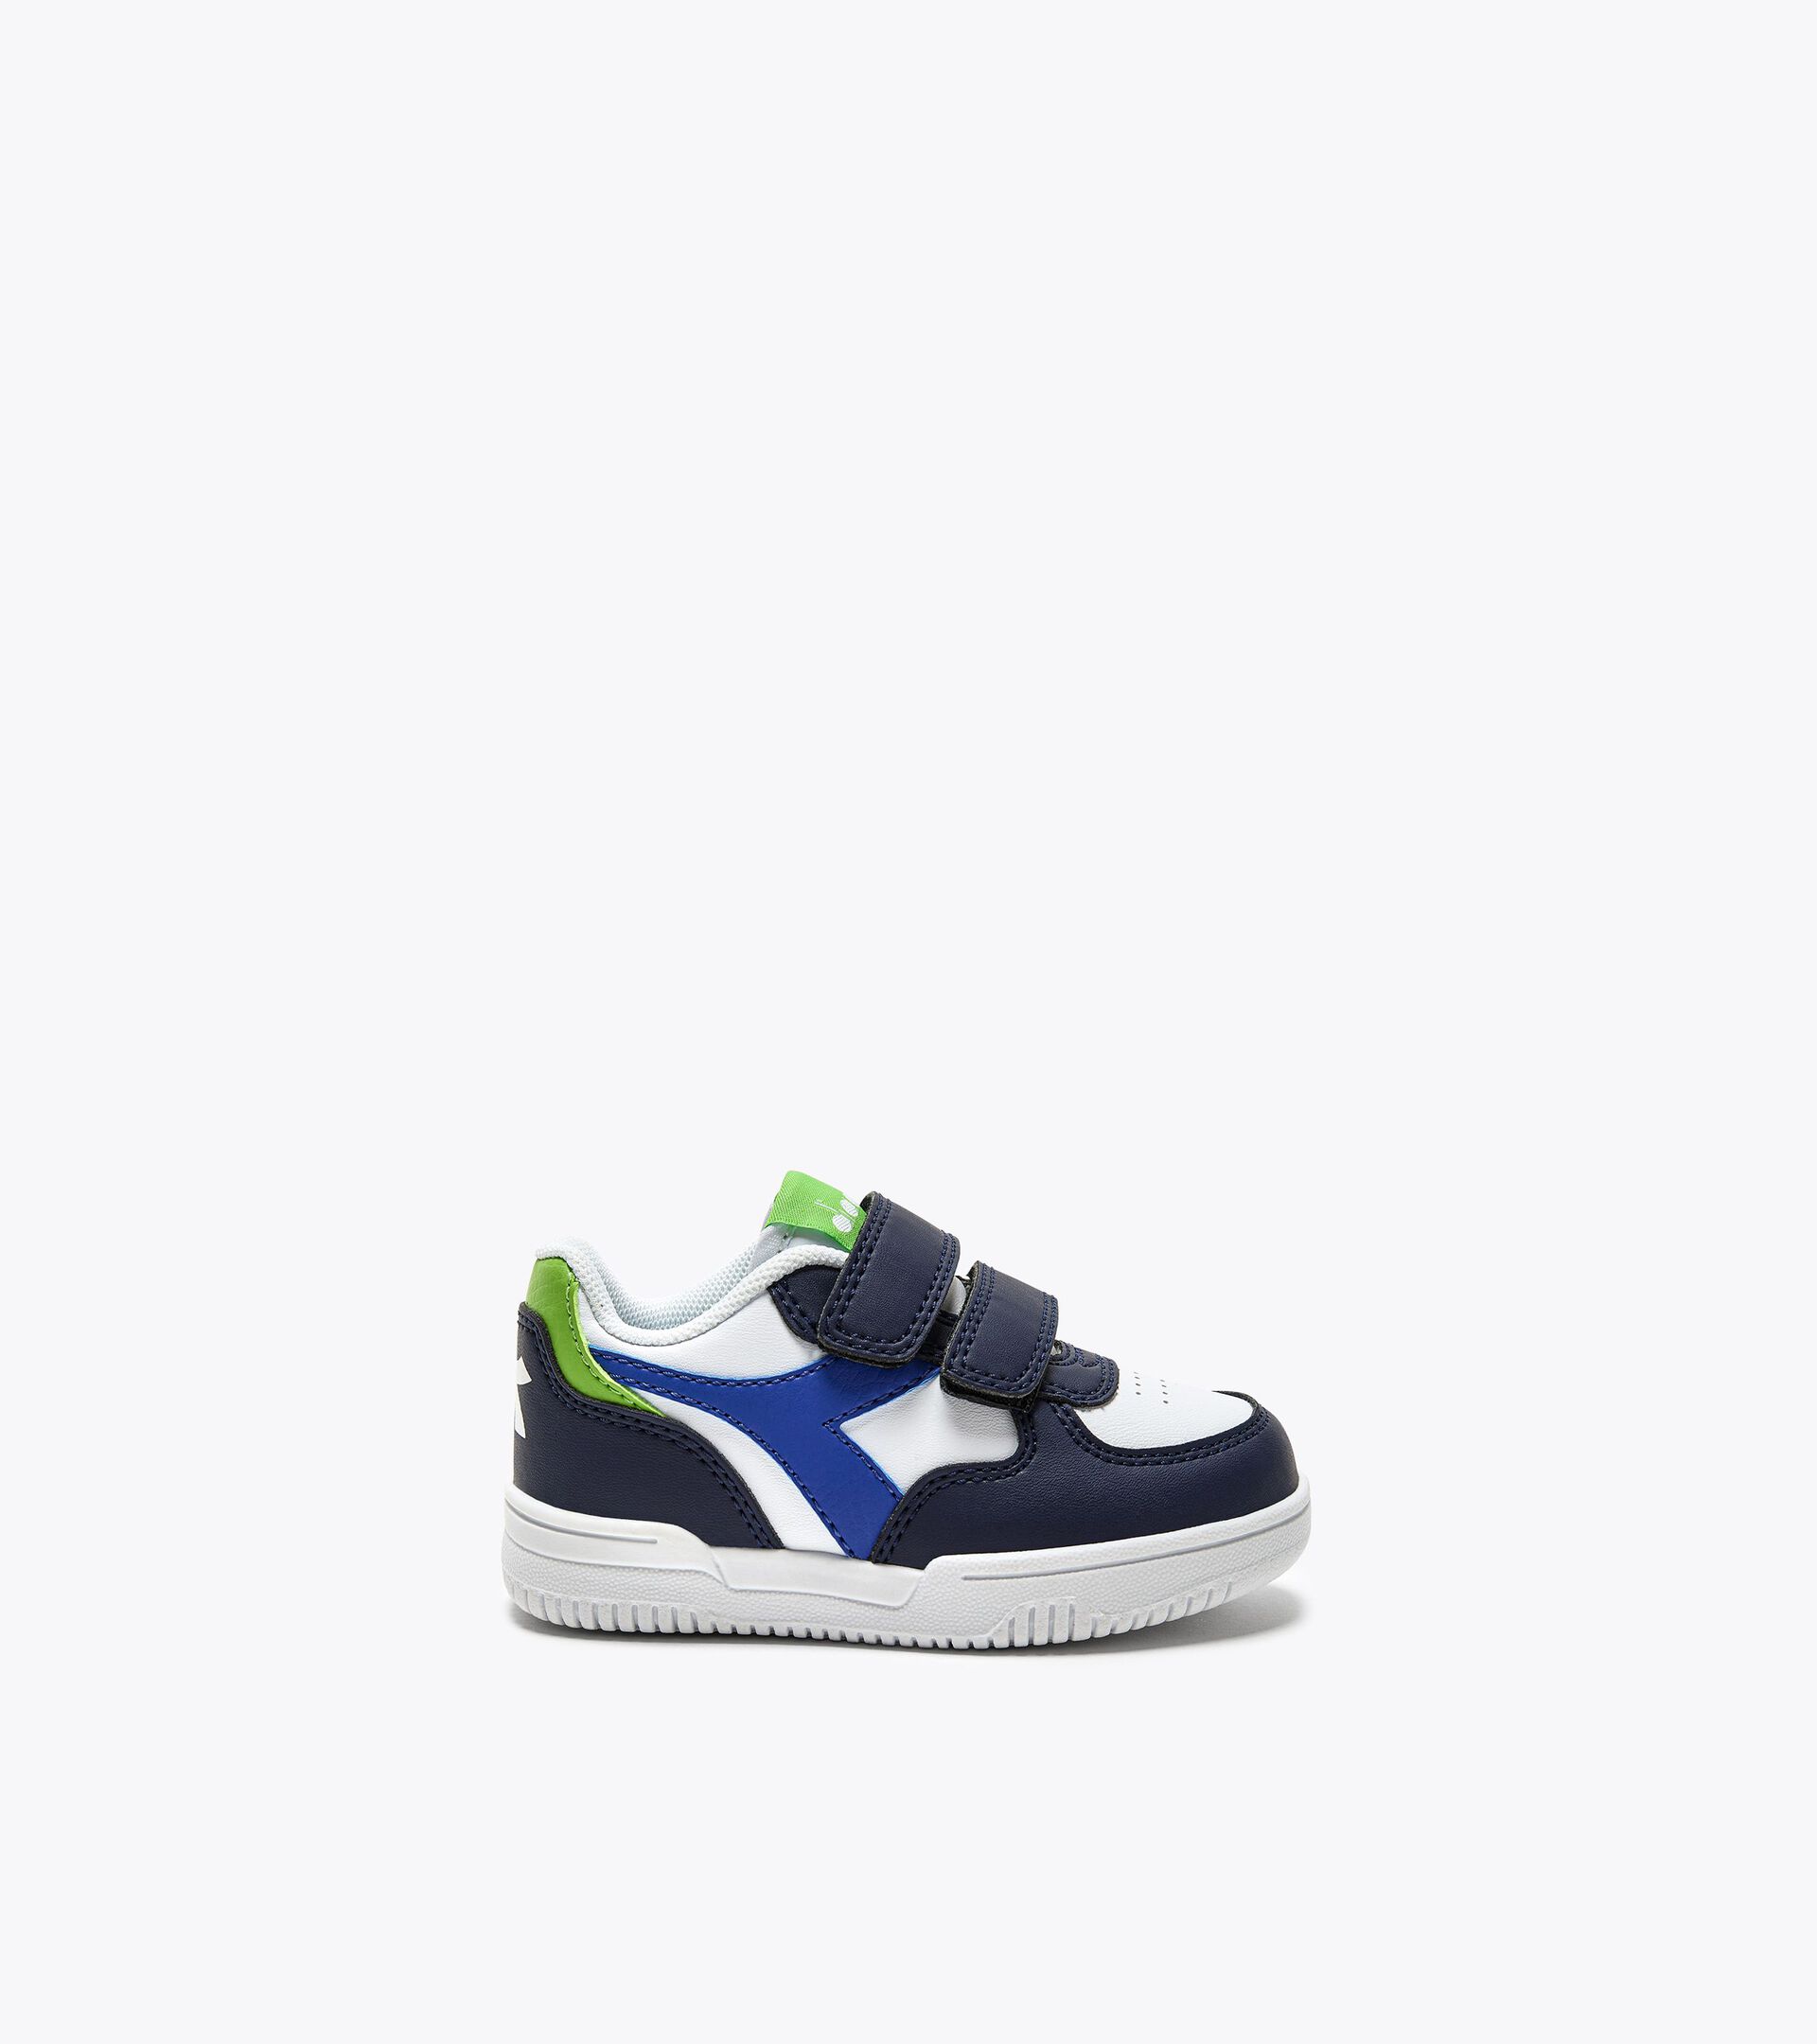 Sports shoes - Toddlers 1-4 years RAPTOR LOW TD PEACOAT/SURF THE WEB/JASMINE G - Diadora